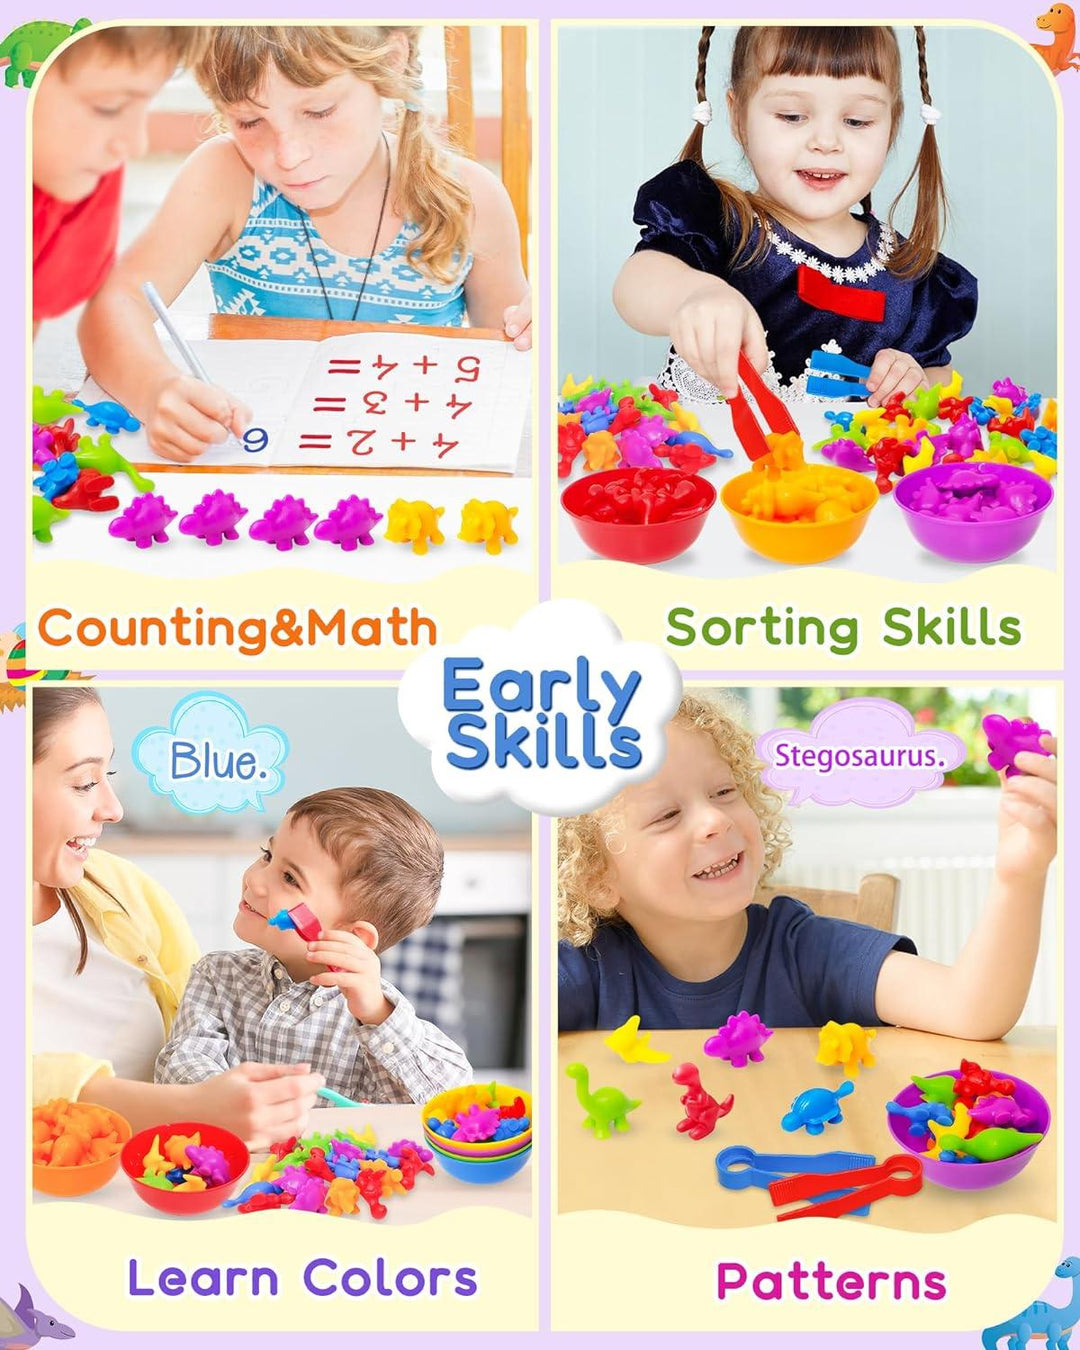 Premium Quality Counting Dinosaurs Montessori Toys for 3 4 5 Years Old Boys Girls Toddler Preschool Learning Activities